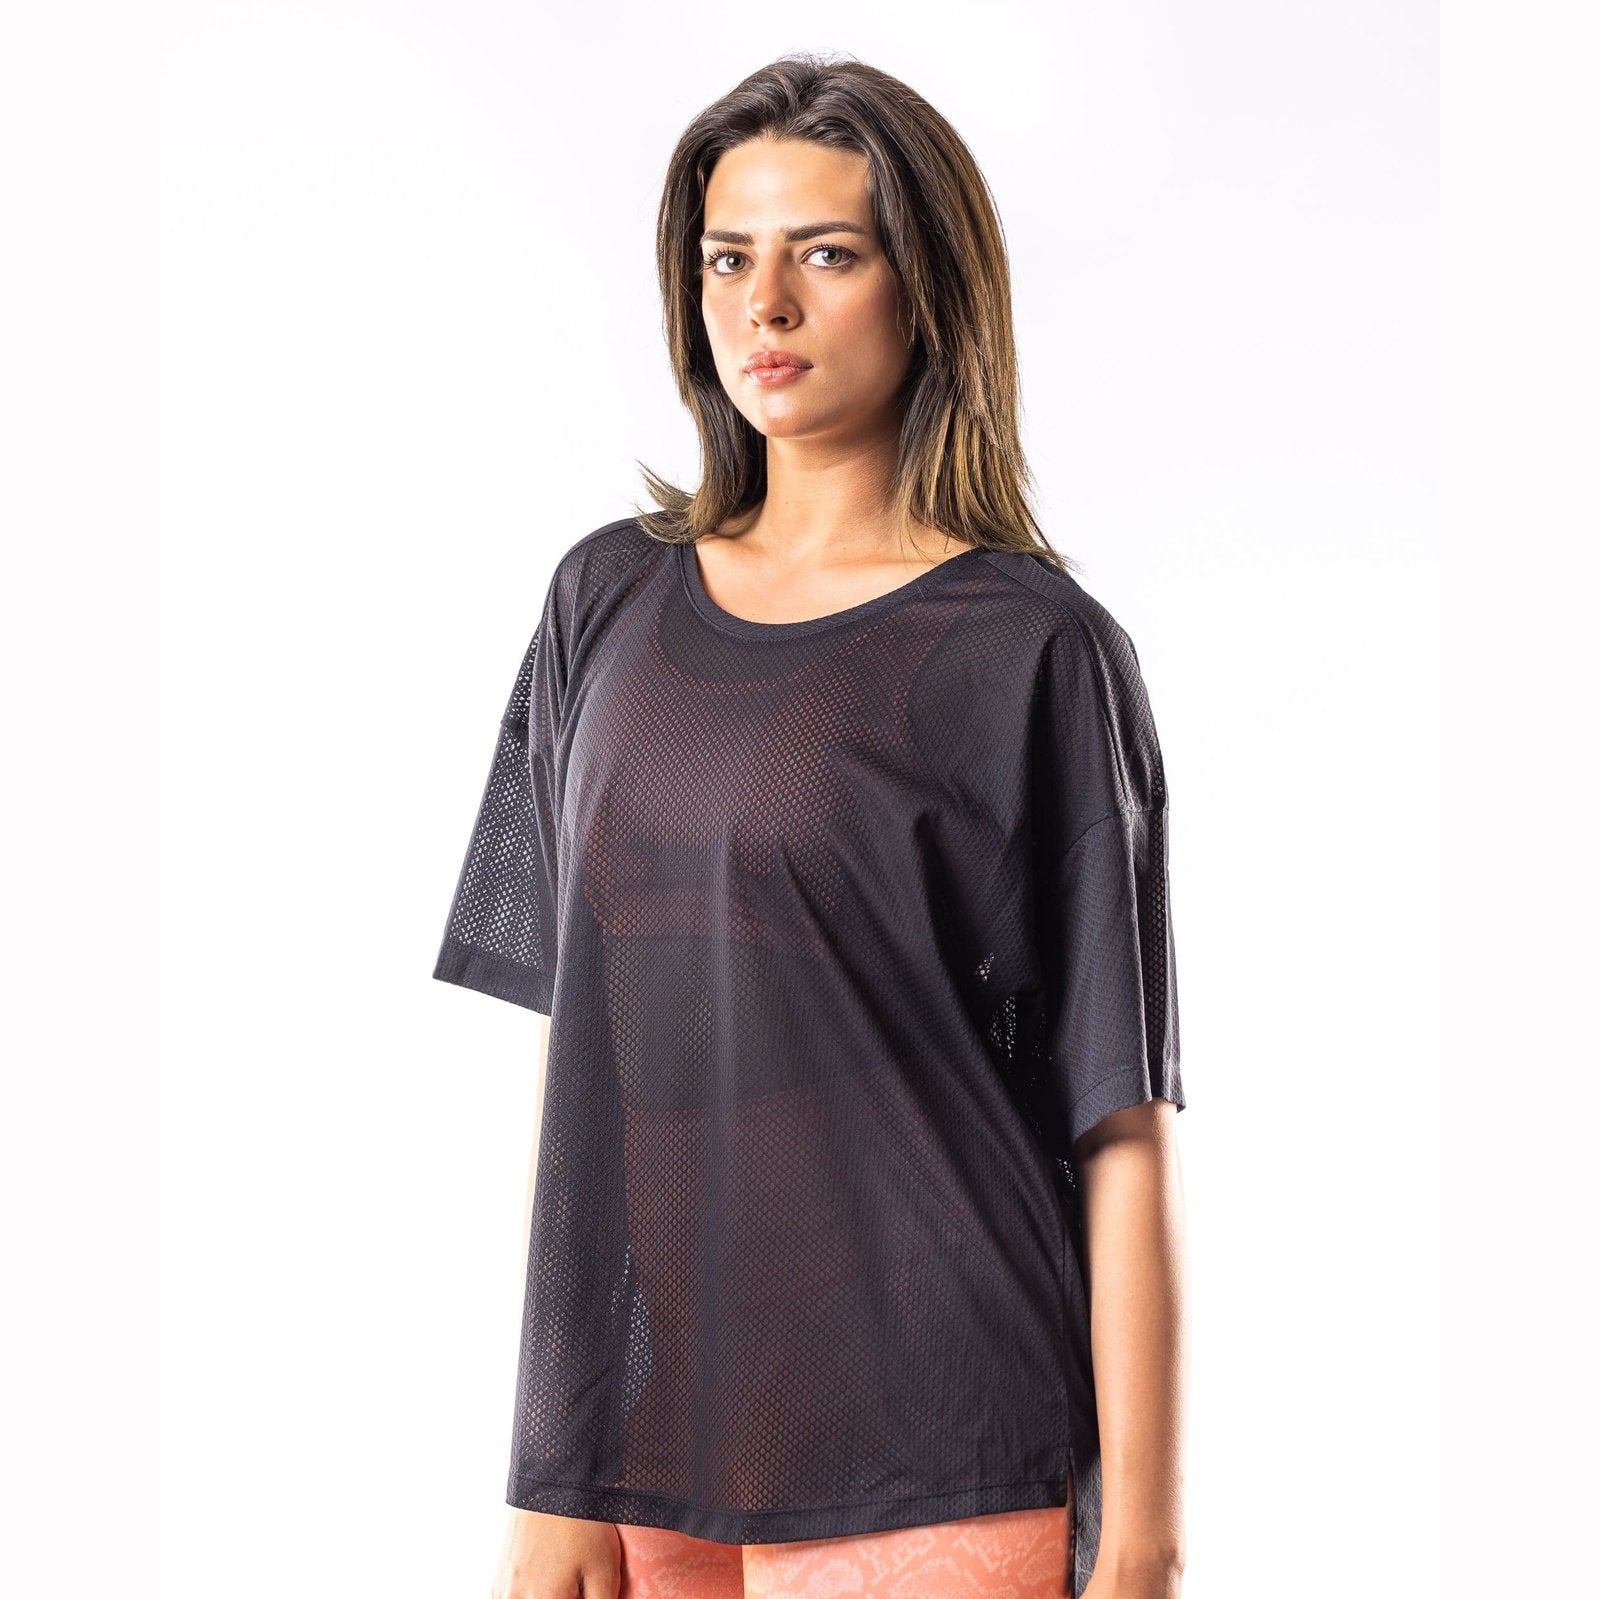 Breathable Mesh T-Shirt in Black - Sporty Pro